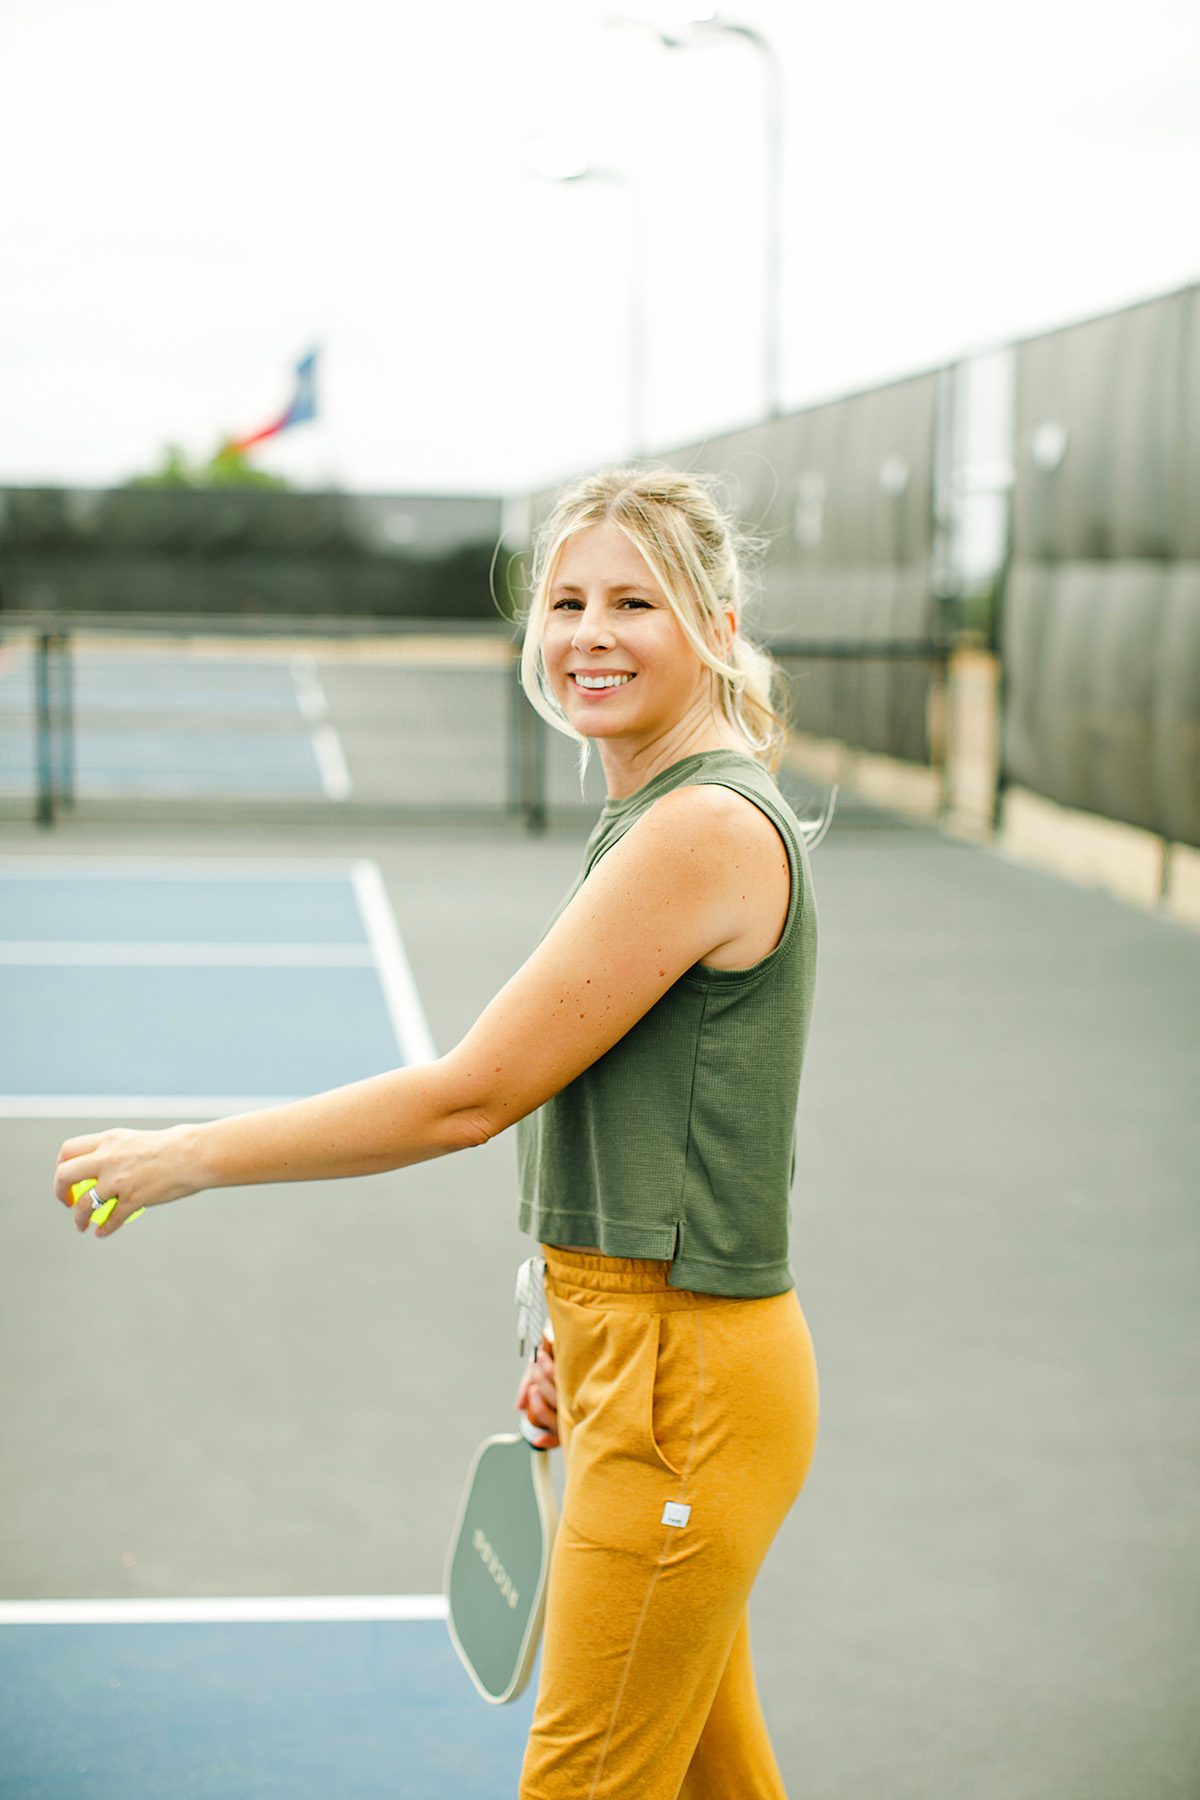 Candace Sant playing pickleball at Dreamland in Dripping Springs, Texas